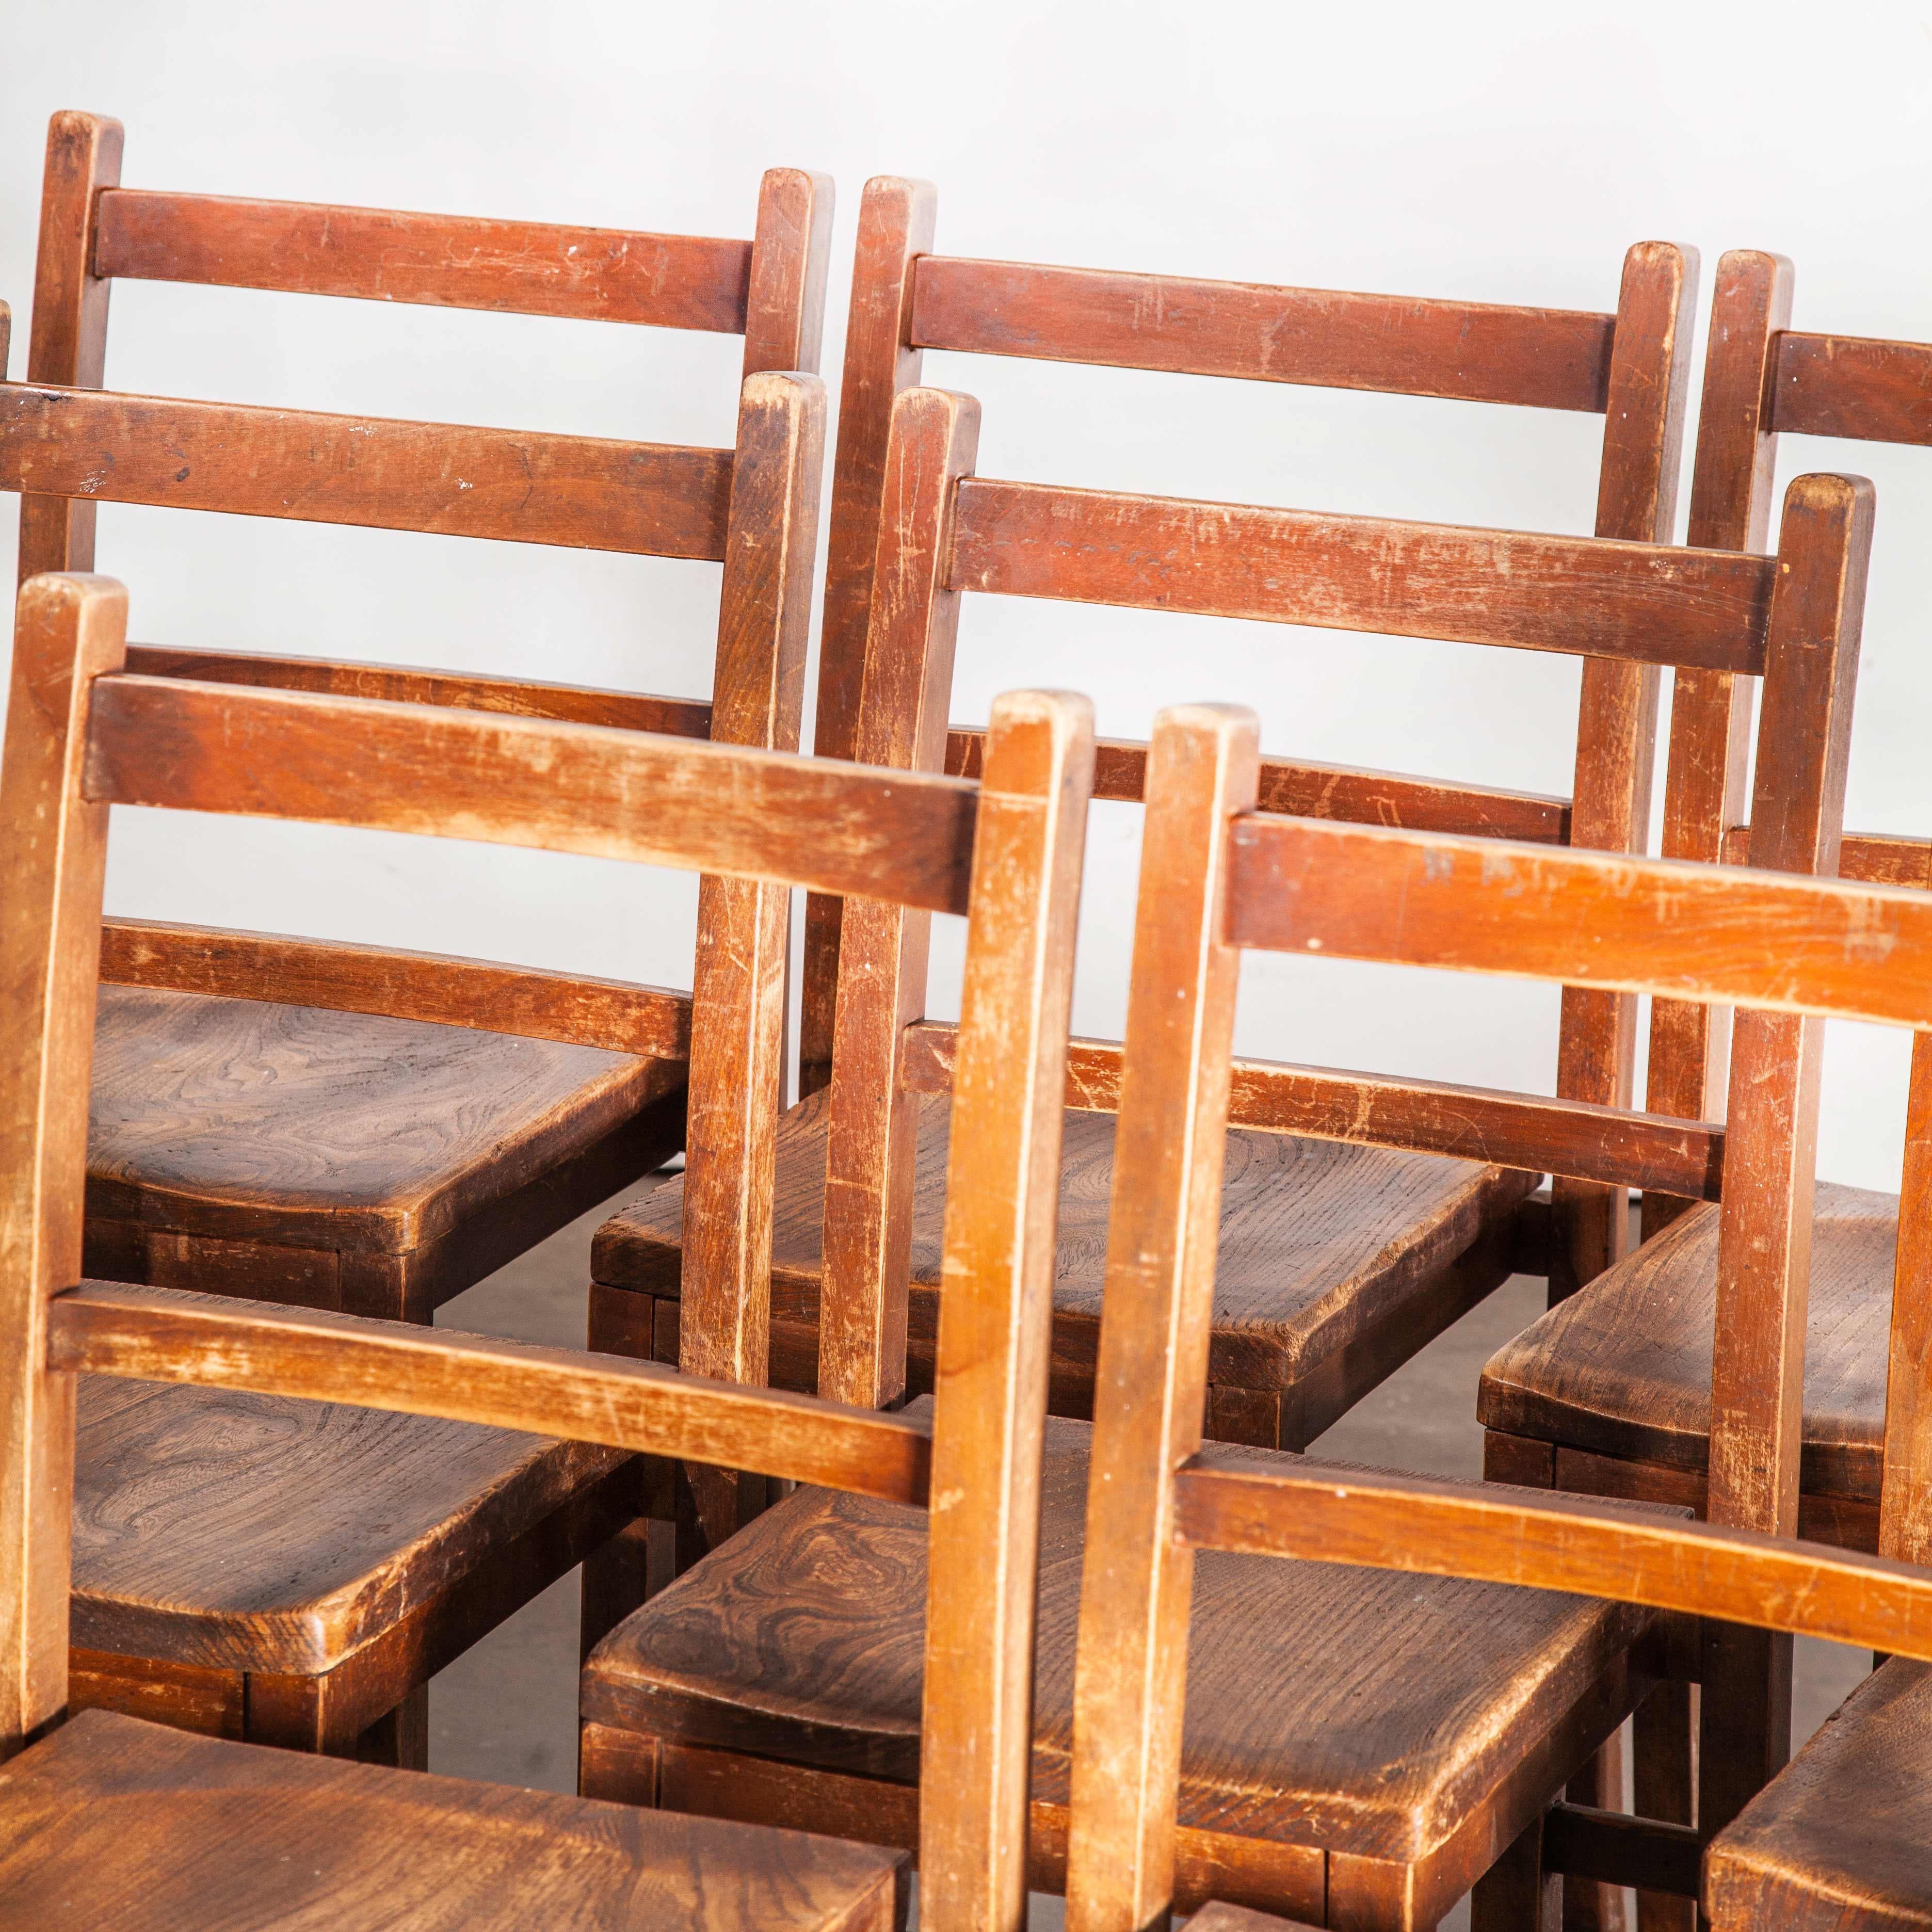 1920s Elm Chapel/Church stacking dining chairs – Good quantity available
1920s Elm Chapel/Church stacking dining chairs – good quantities available. It’s hard to date them precisely but we reckon these are Church chairs from the 1920s. We have